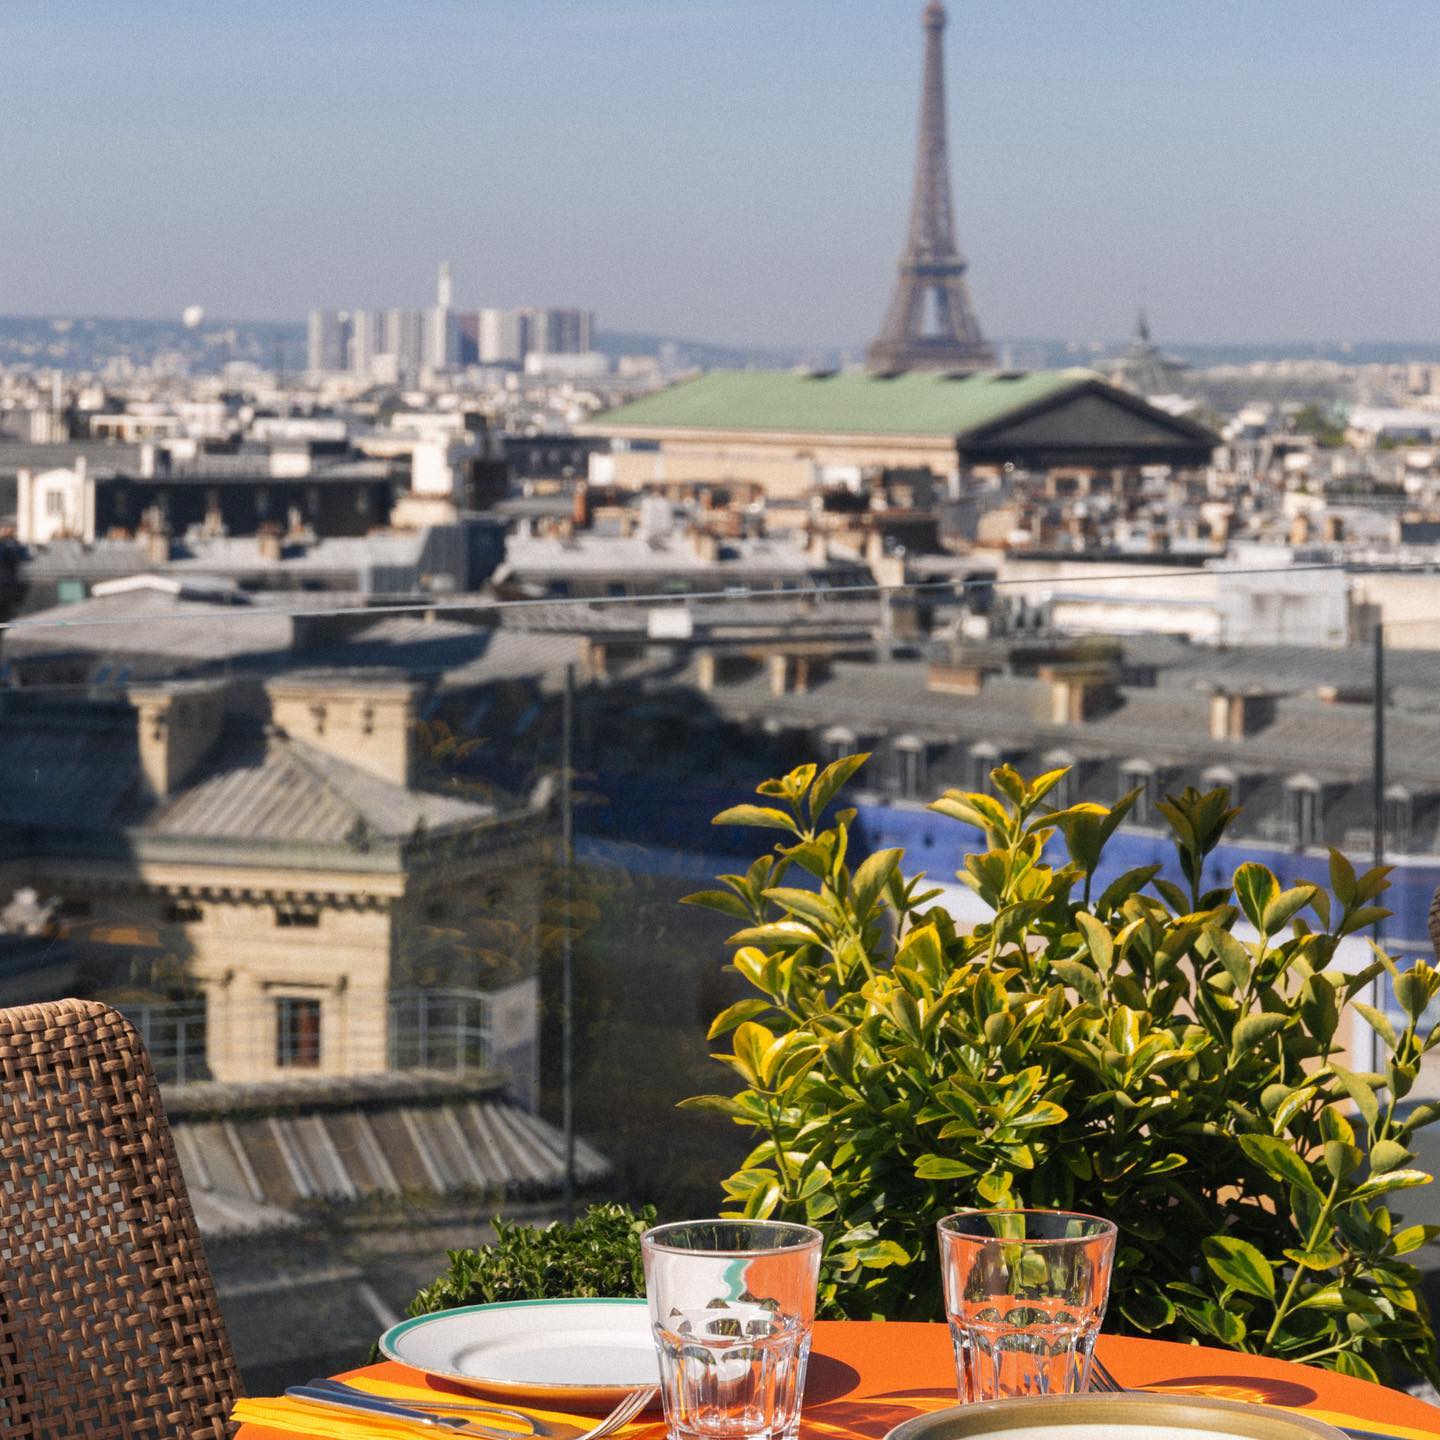 The Best Rooftop Bars in Paris - Rooftop bars in Paris are good choices for enjoying the Paris skyline or the Eiffel Tower view.